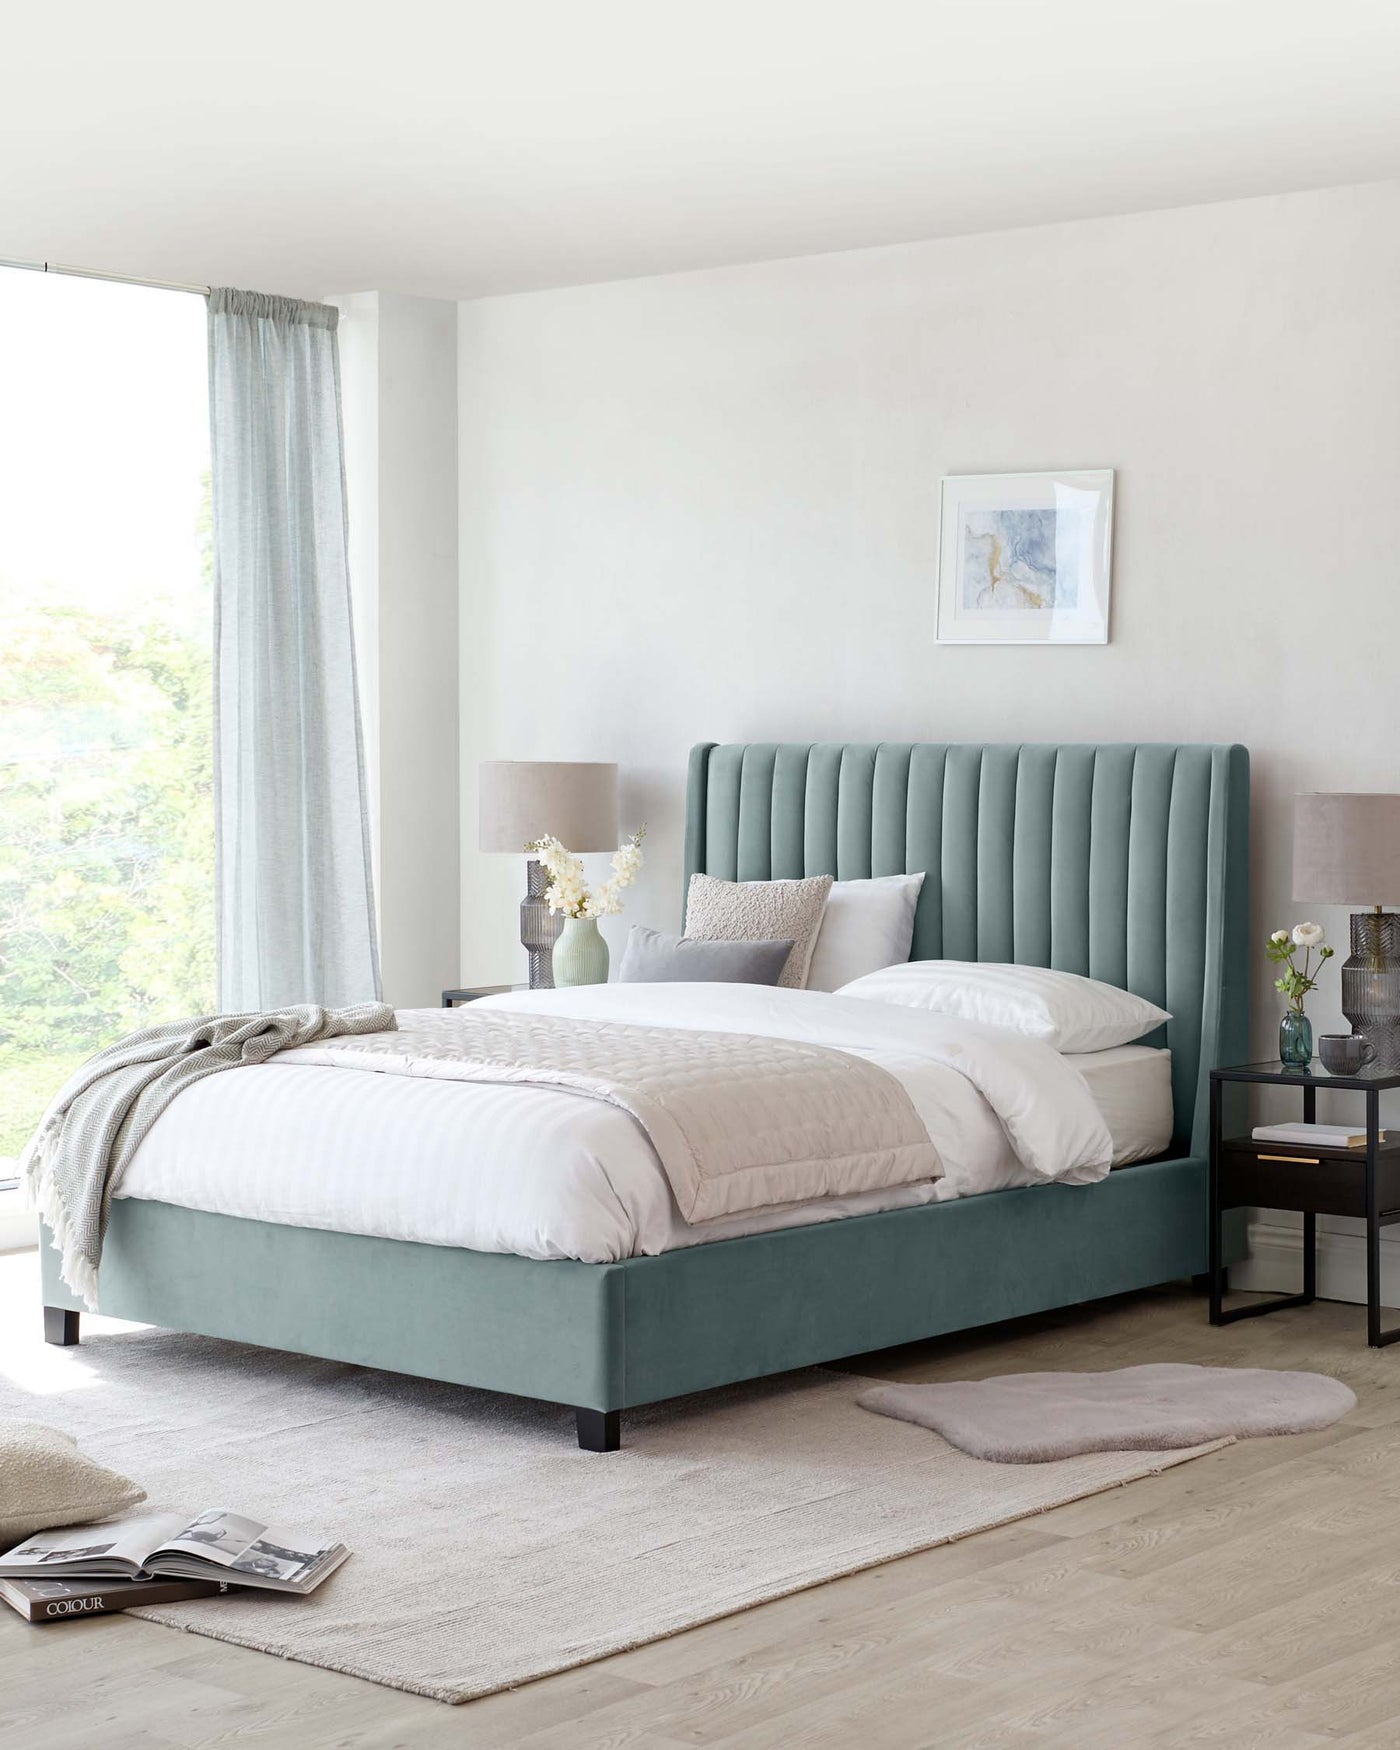 Elegant bedroom featuring a large king-size bed with a teal upholstered headboard displaying vertical channel tufting. The bed is dressed in white and beige bedding with a plush white comforter and assorted throw pillows. Flanking the bed are two nightstands, one with a modern table lamp and a vase of white flowers, the other with a glass vase and books. The serene setting is complemented by a light grey area rug beneath the bed and soft curtains framing a window with a view of greenery outside.